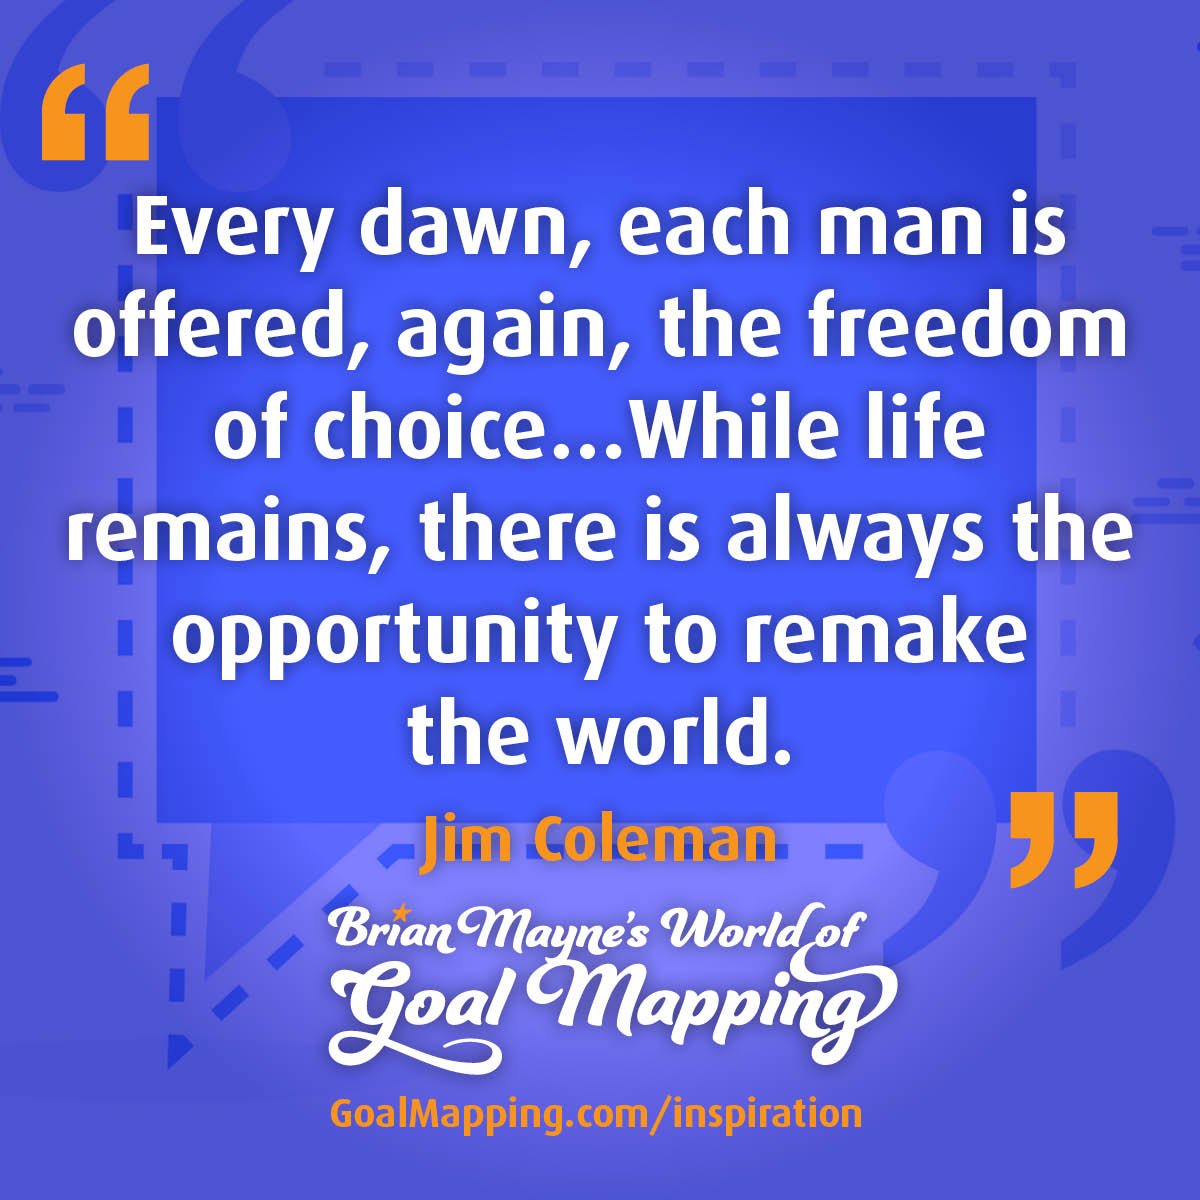 "Every dawn, each man is offered, again, the freedom of choice…While life remains, there is always the opportunity to remake the world." Jim Coleman